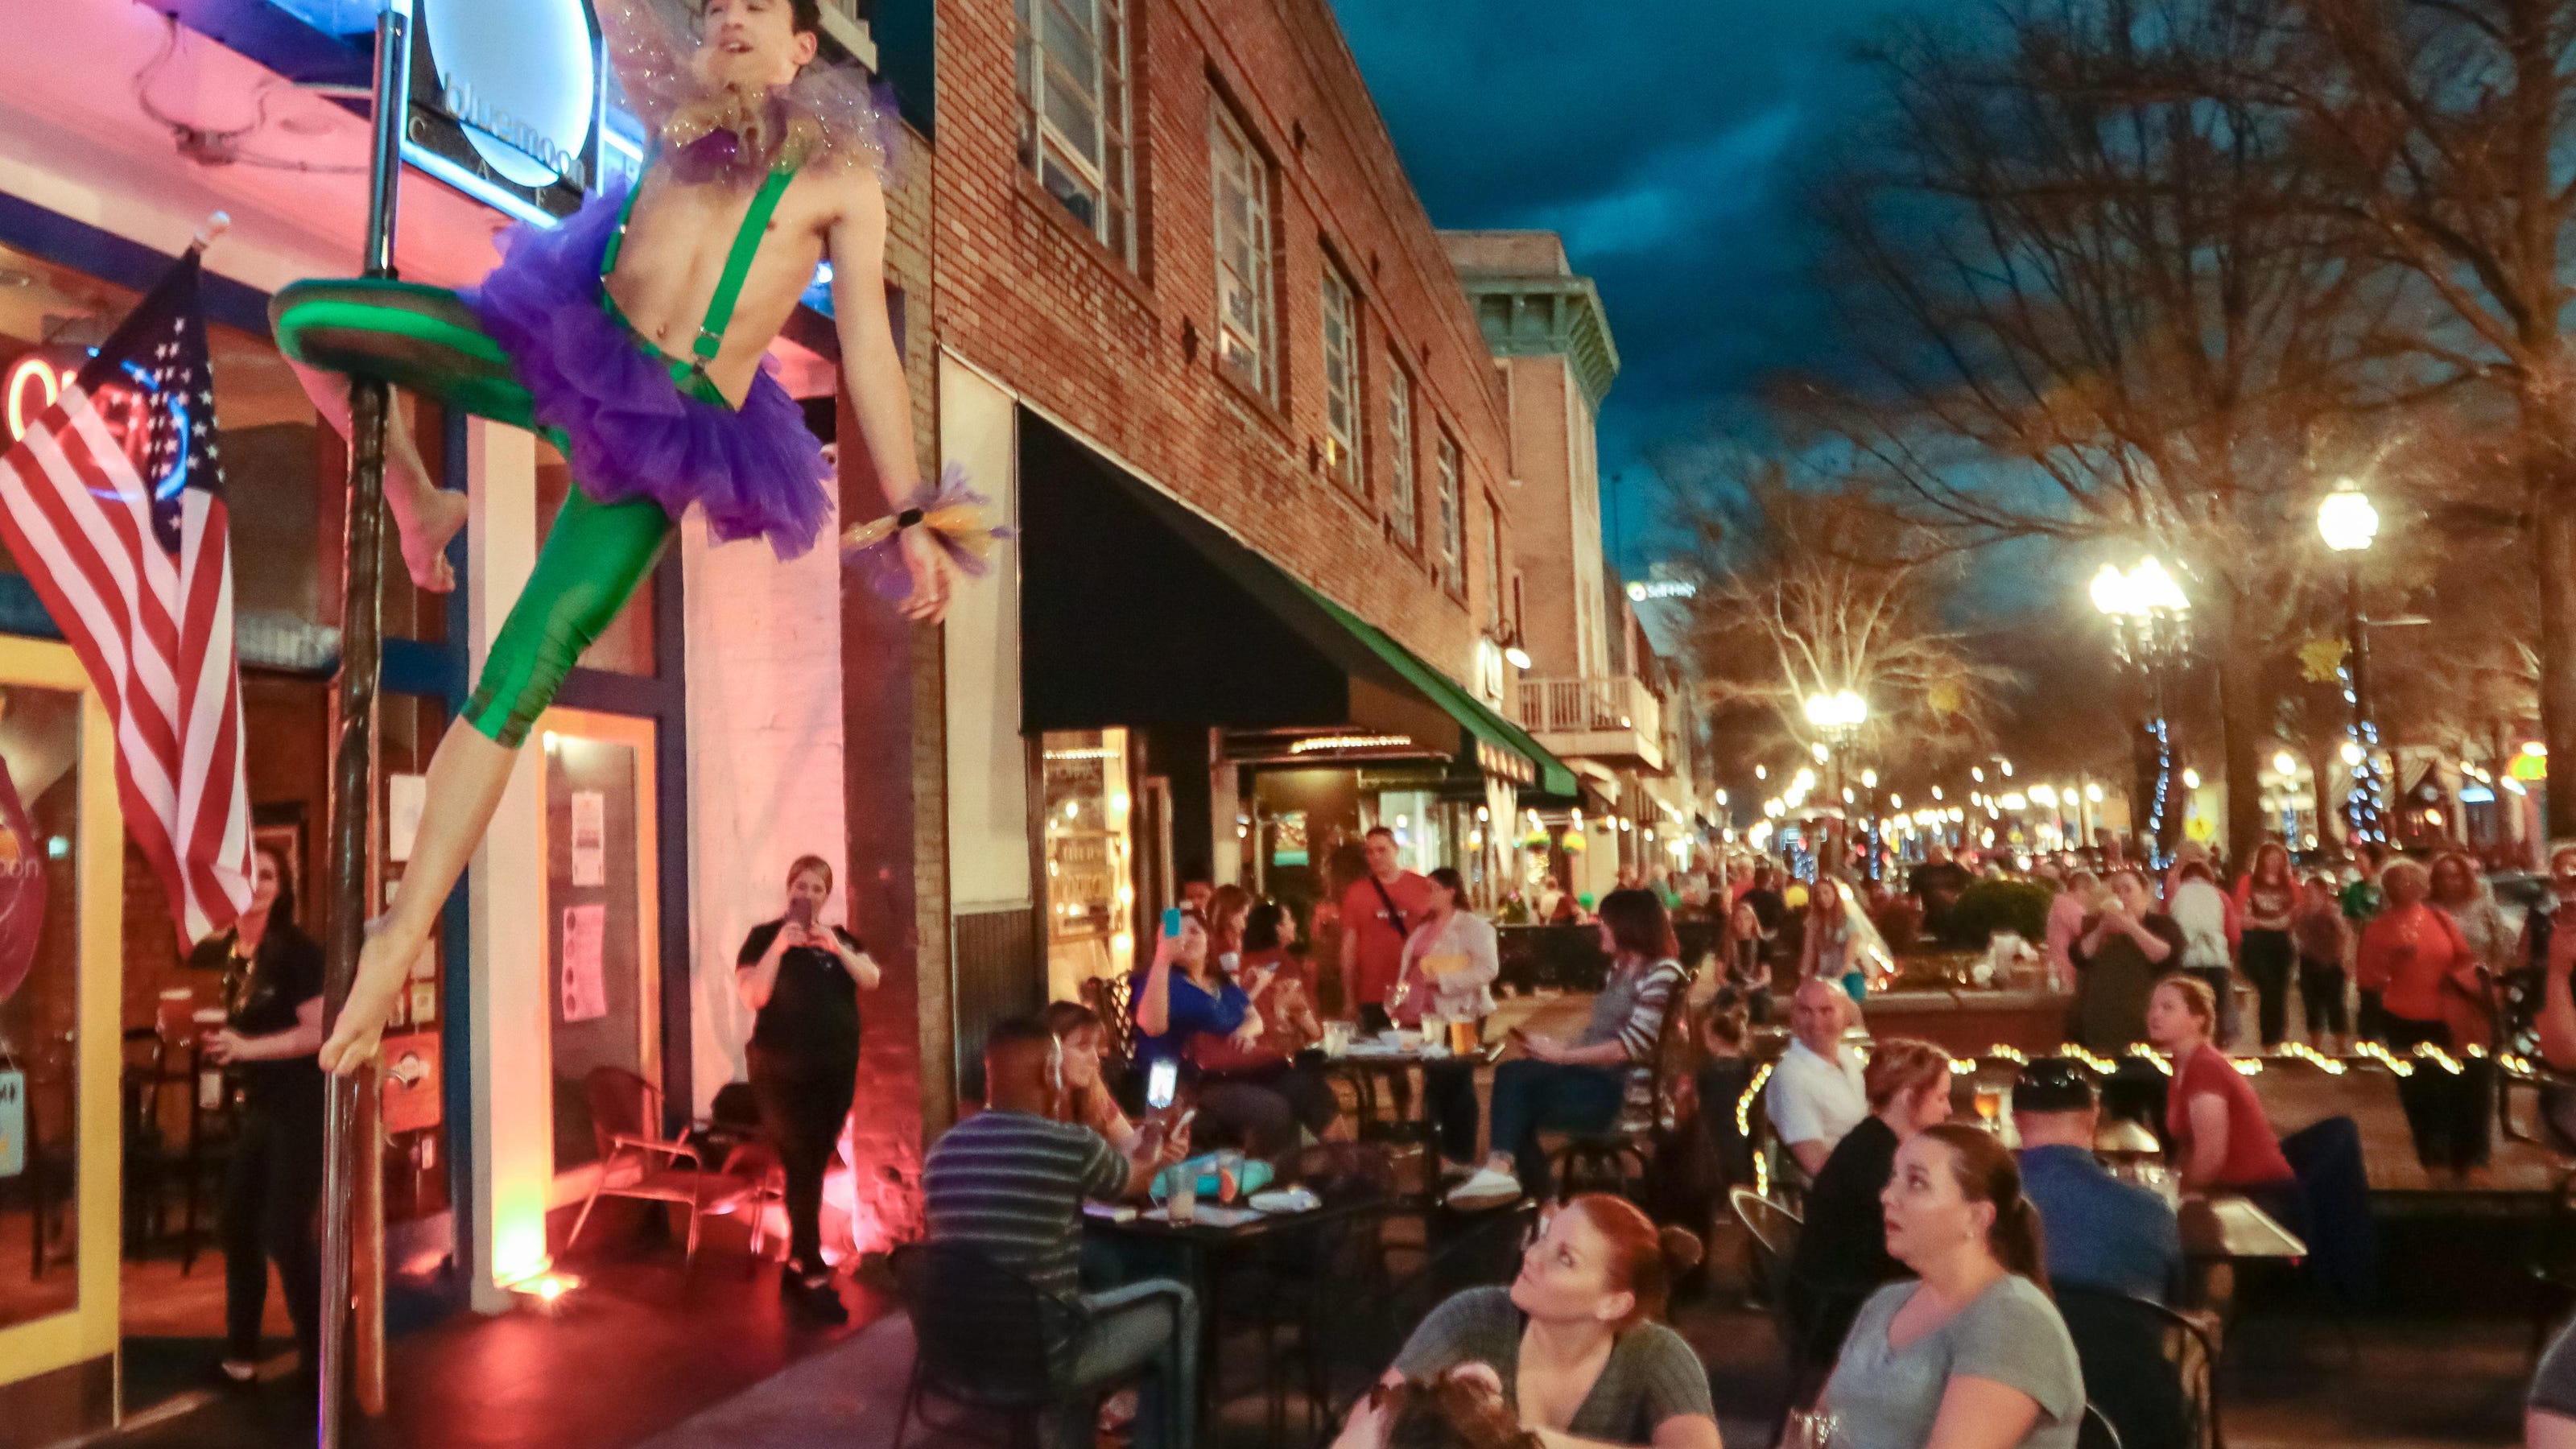 Things to do in Fayetteville, NC this weekend